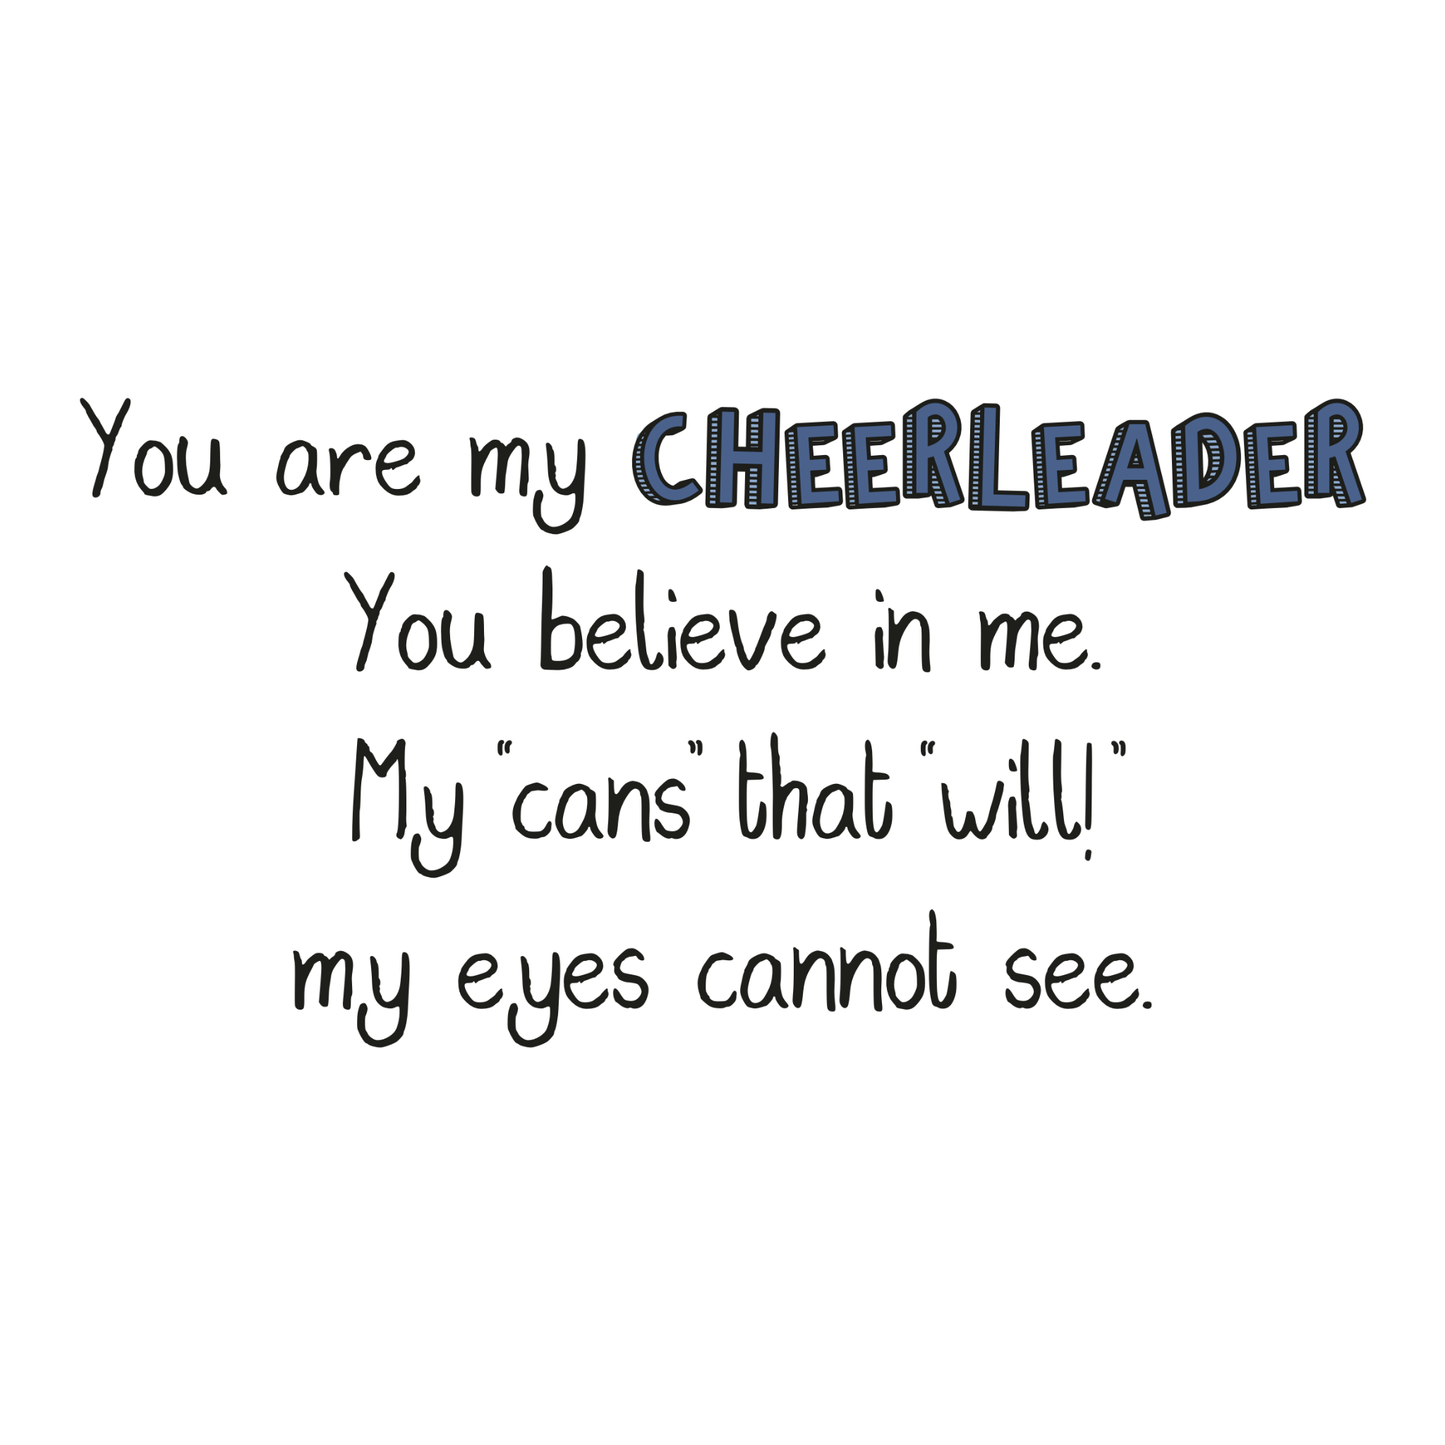 An example page from the self-published personalized book called “You’re More Than My Teacher” featuring a page of rhythmic and encouraging text about being a cheerleader